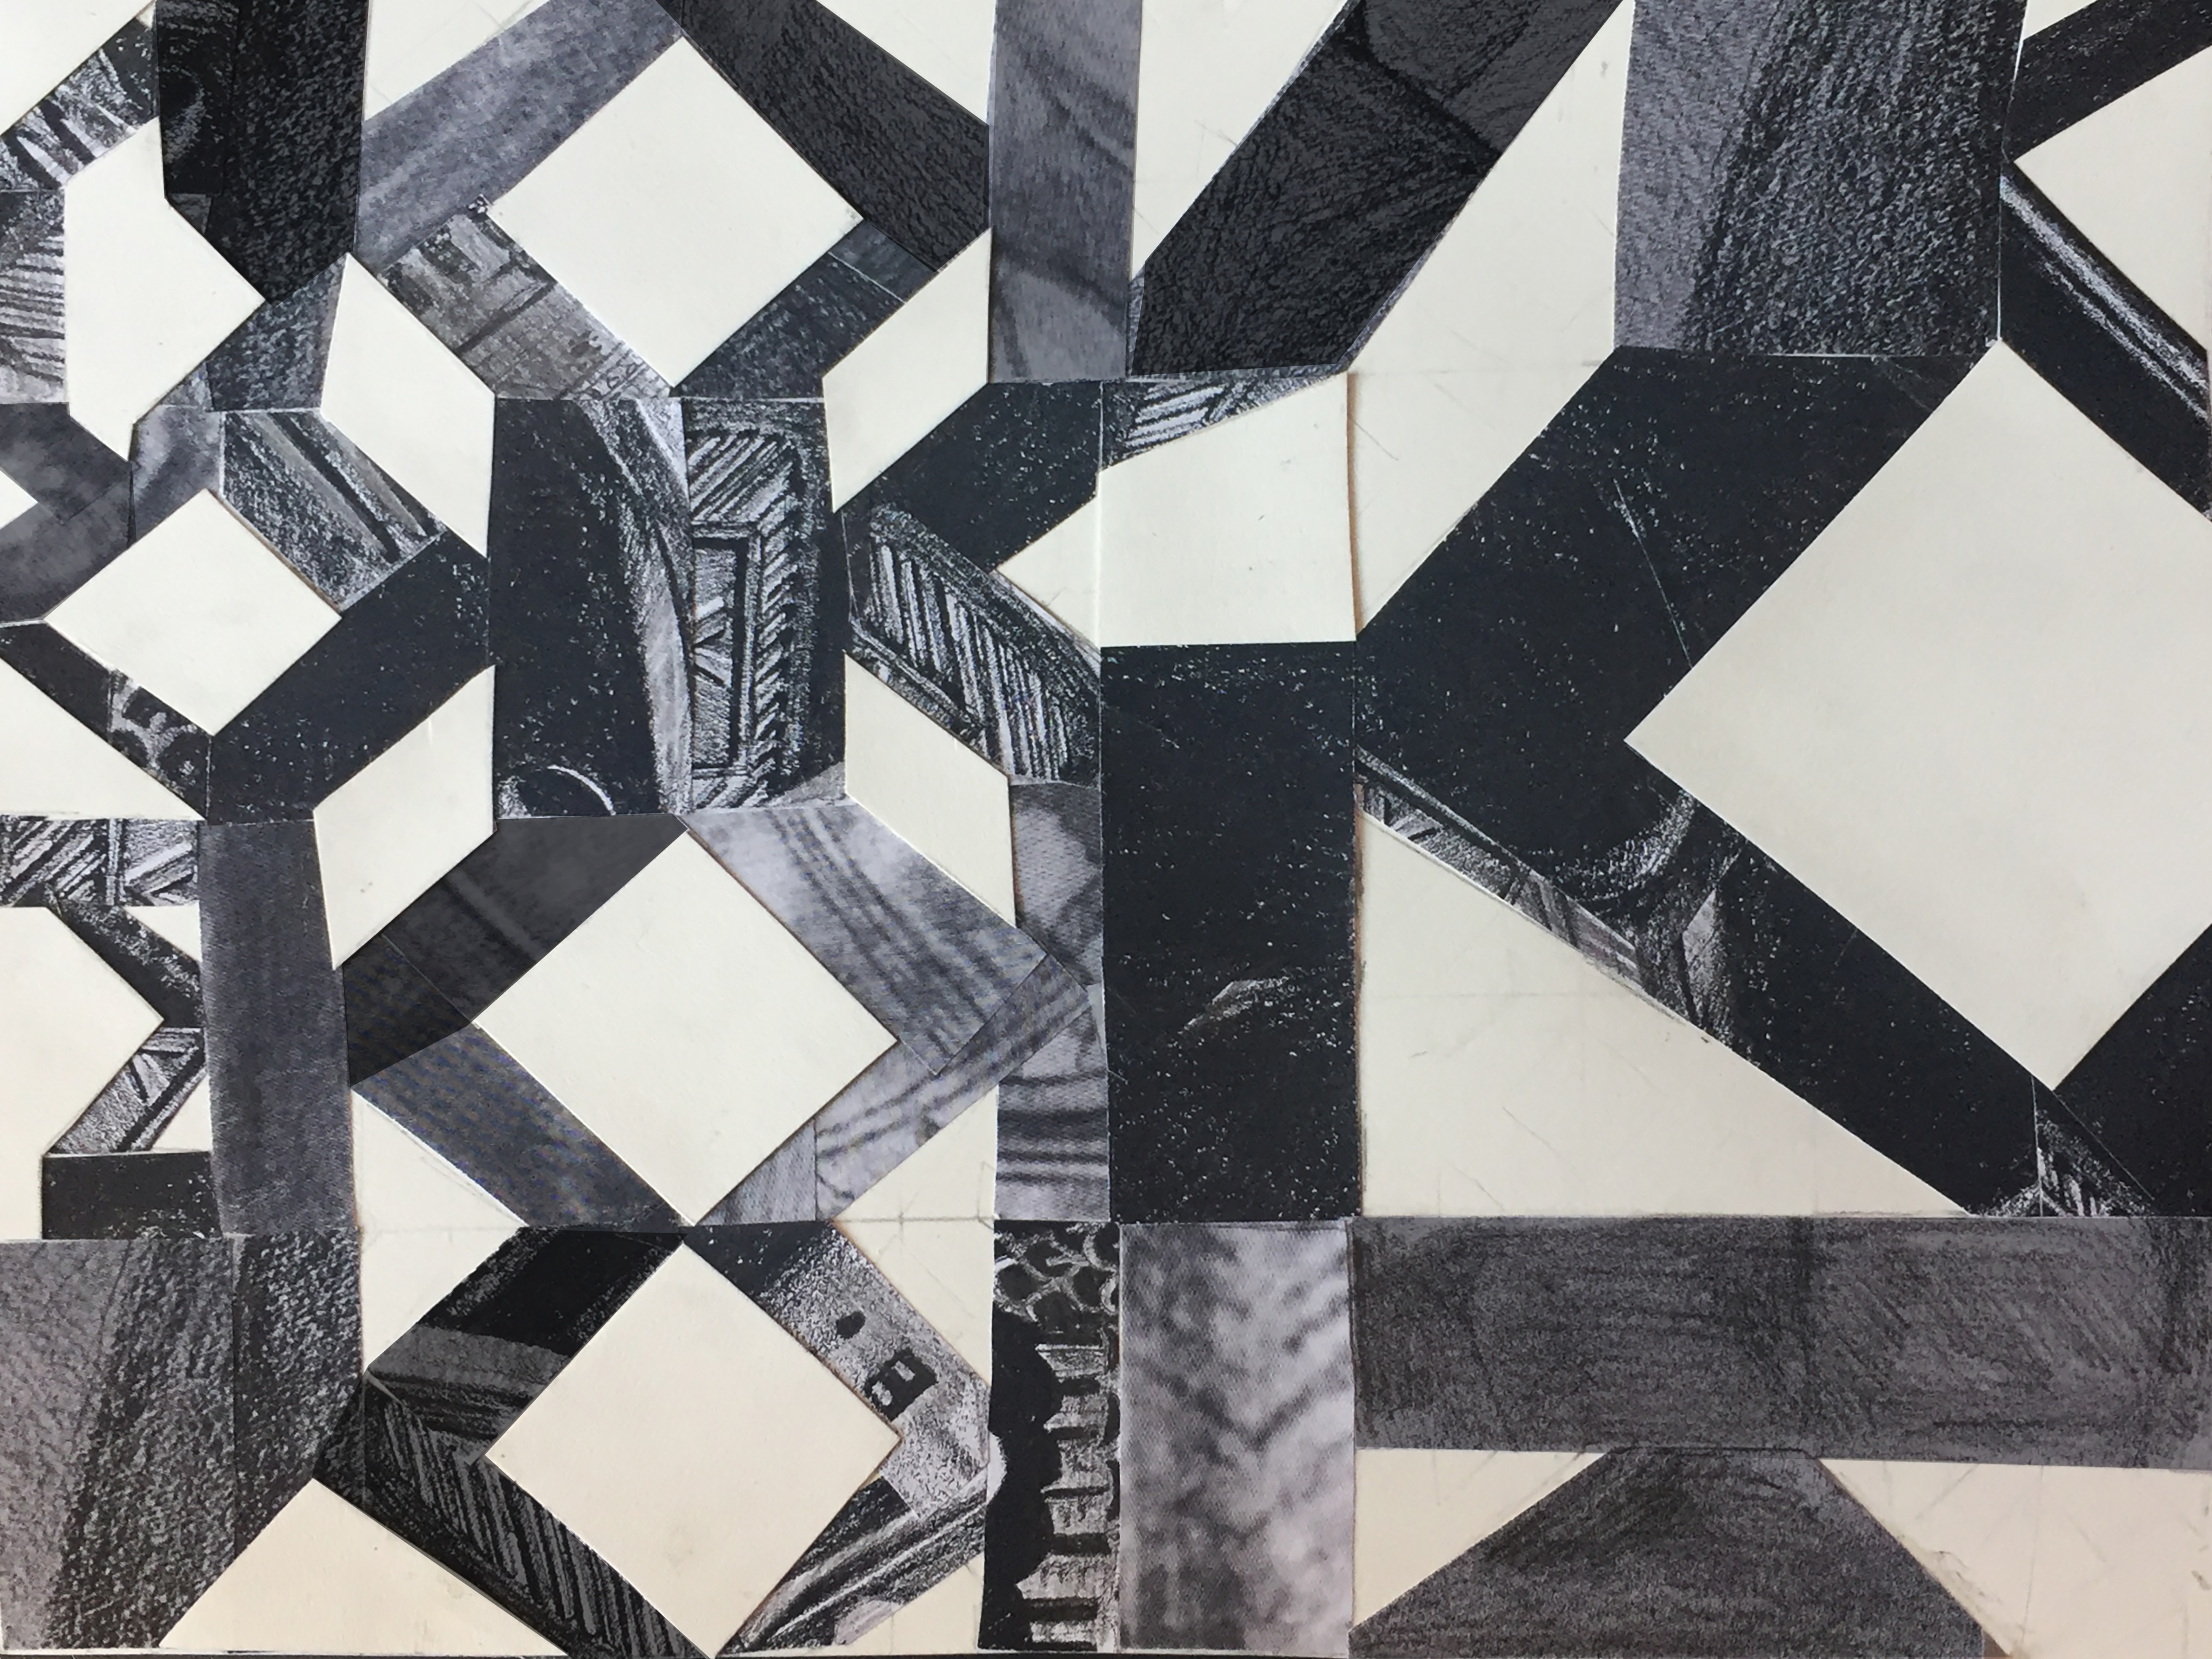 Hand-made collage based on Gestalt Theory